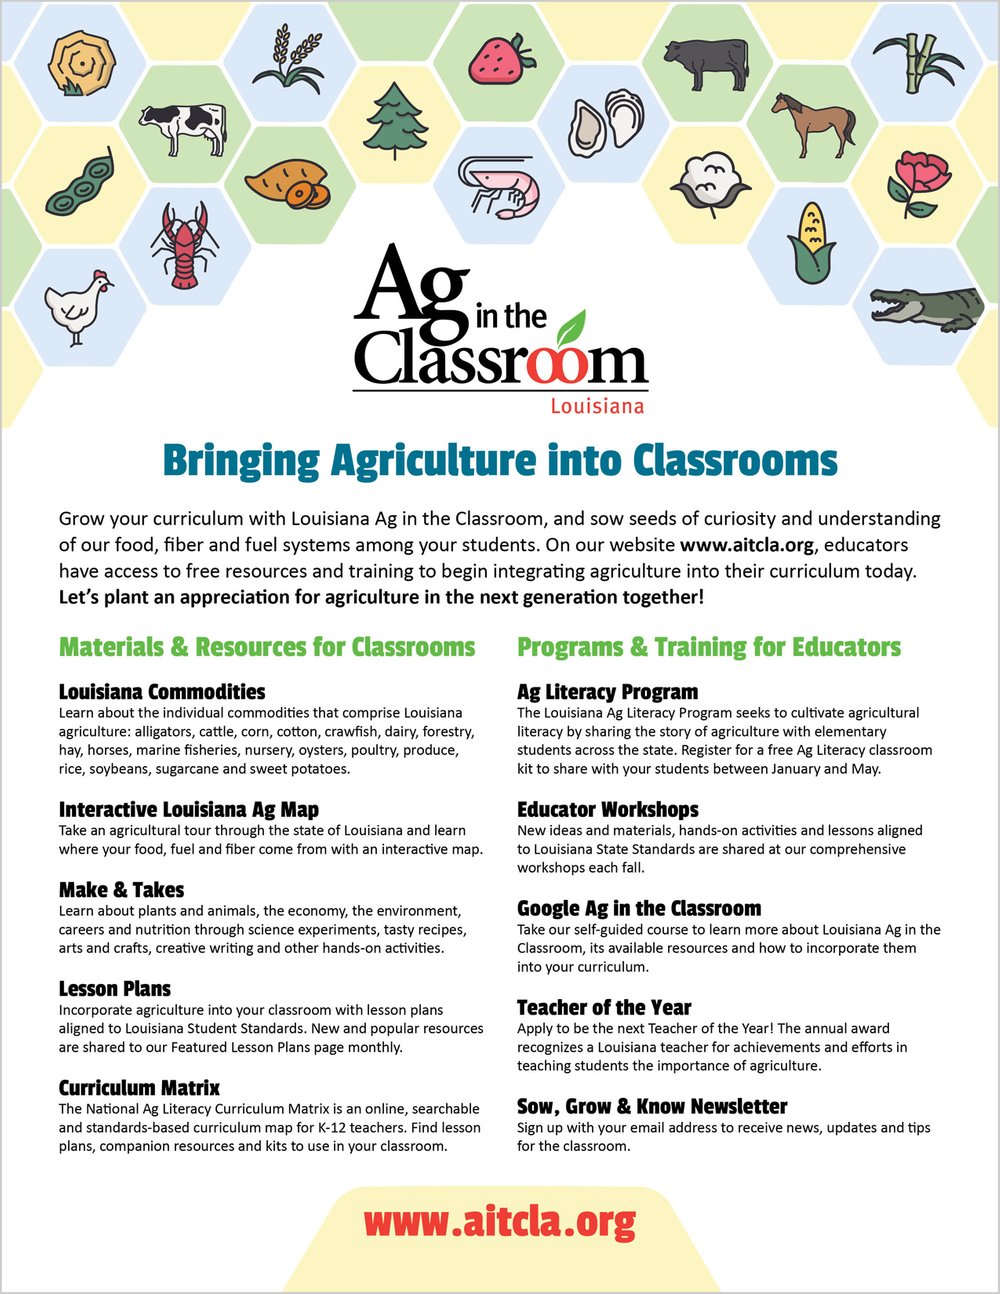 About — Louisiana Ag in the Classroom